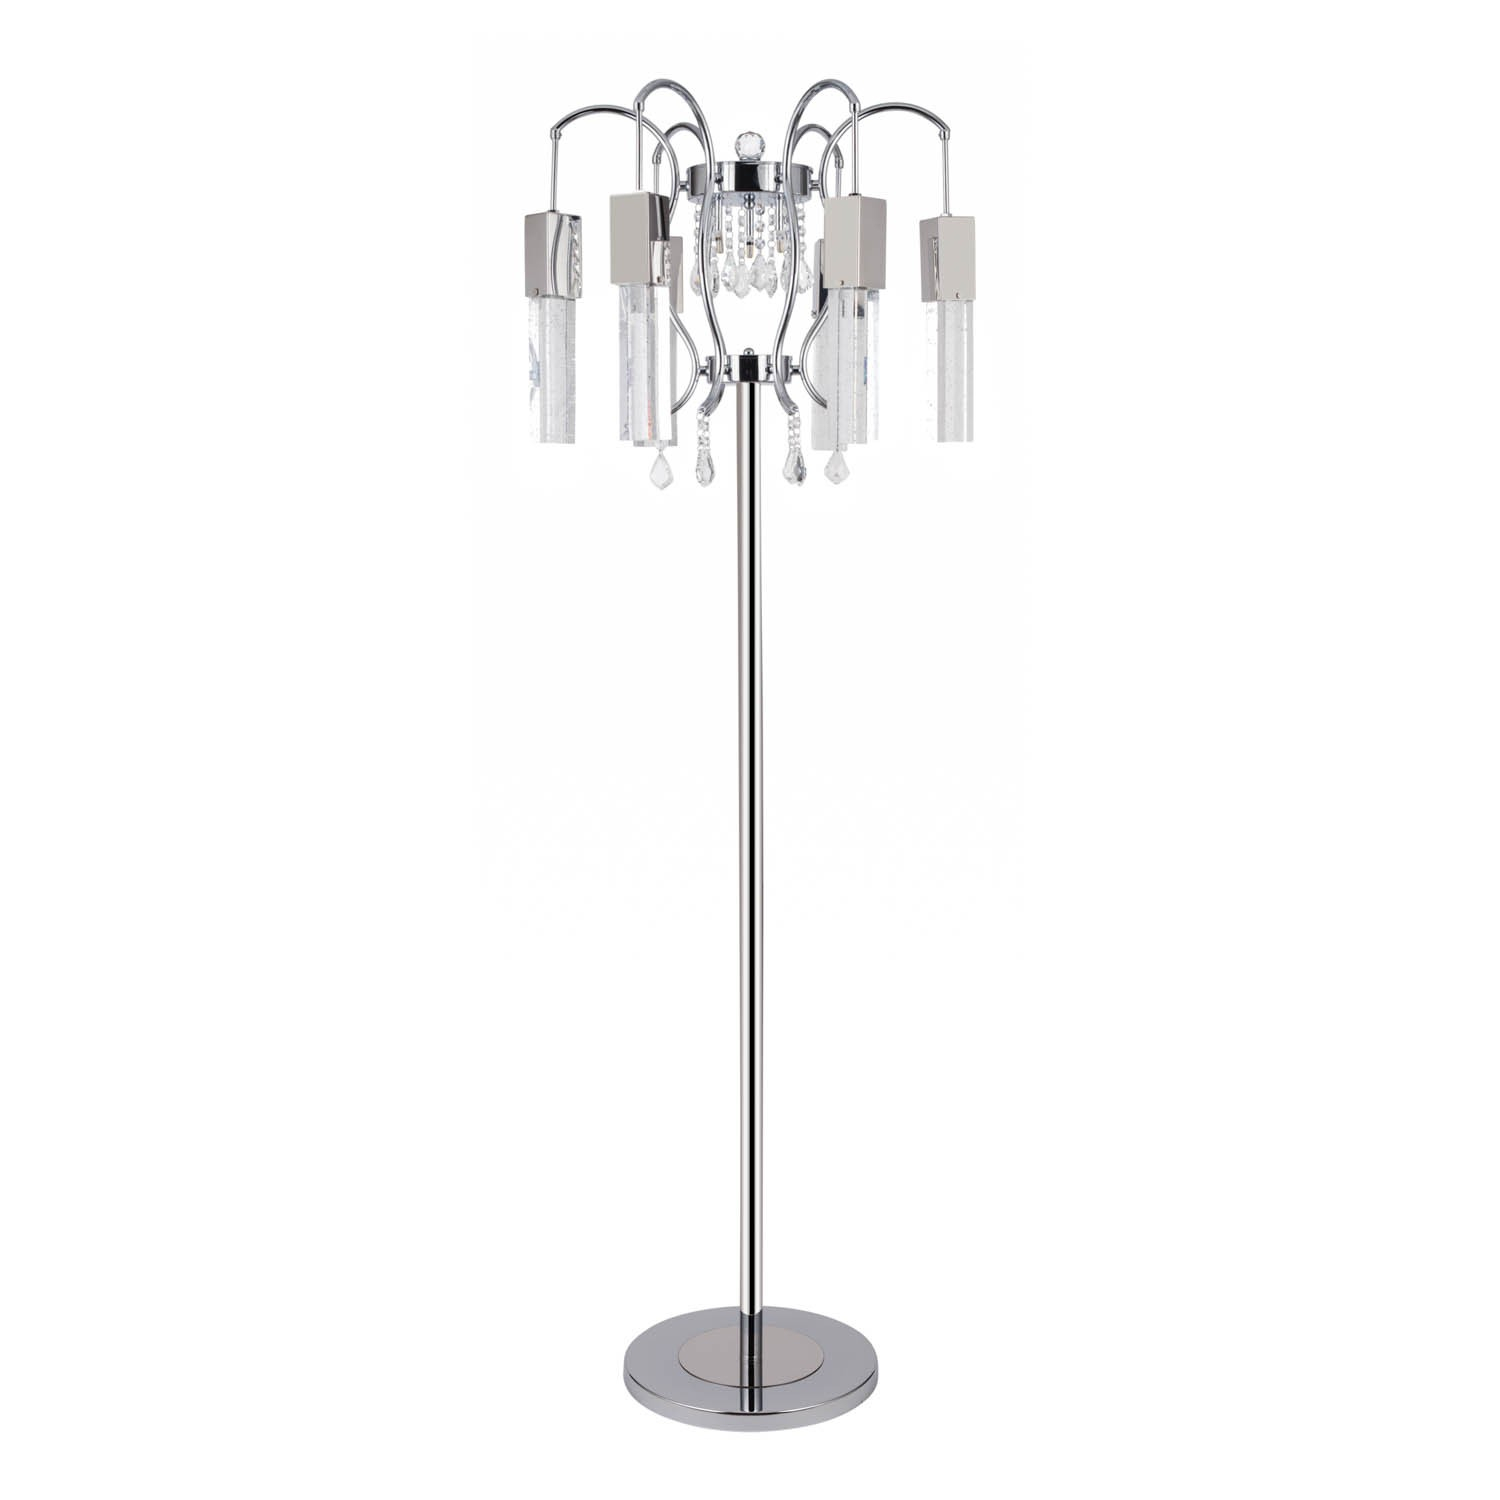 Chandelier Style With Crystal Drops Floor Lamp Lamps Drop pertaining to dimensions 1500 X 1500